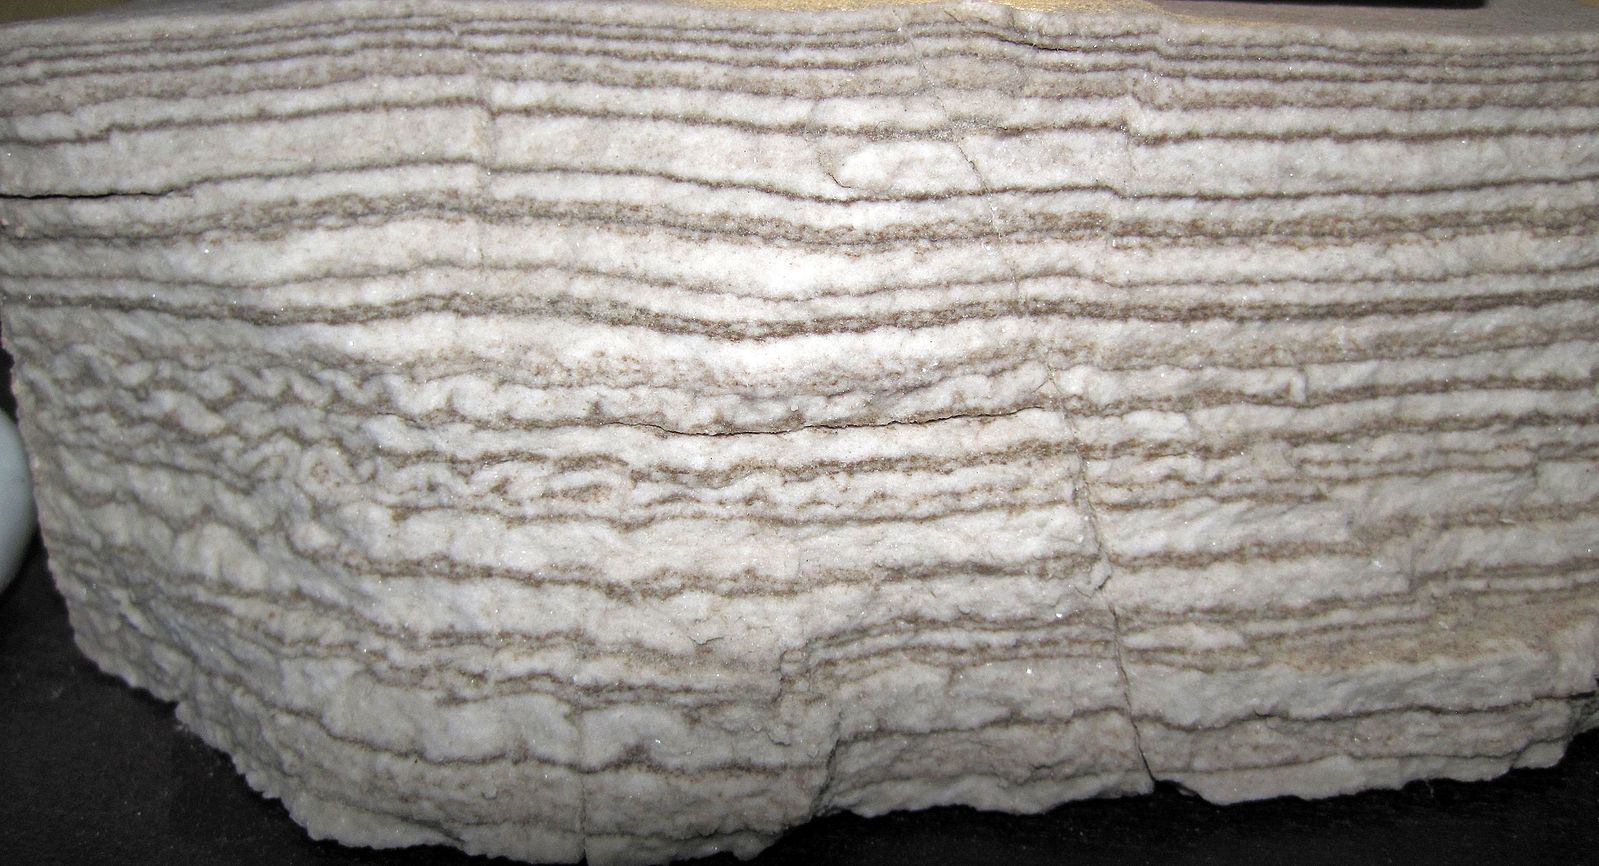 The rock has many light-colored layers.